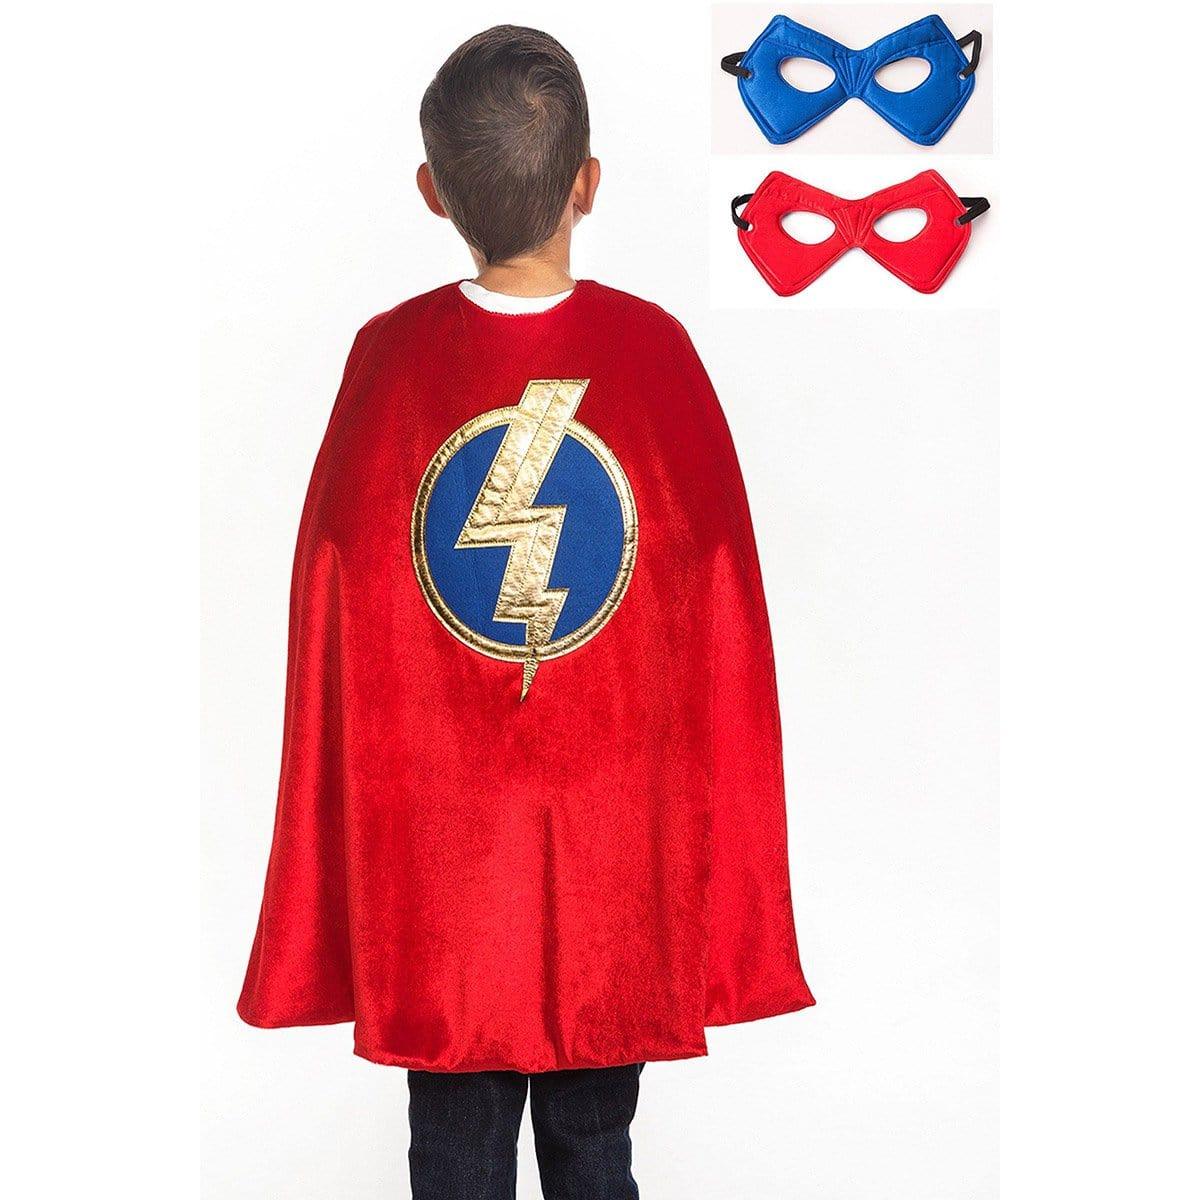 Buy Costume Accessories Red hero cape & mask set for boys sold at Party Expert